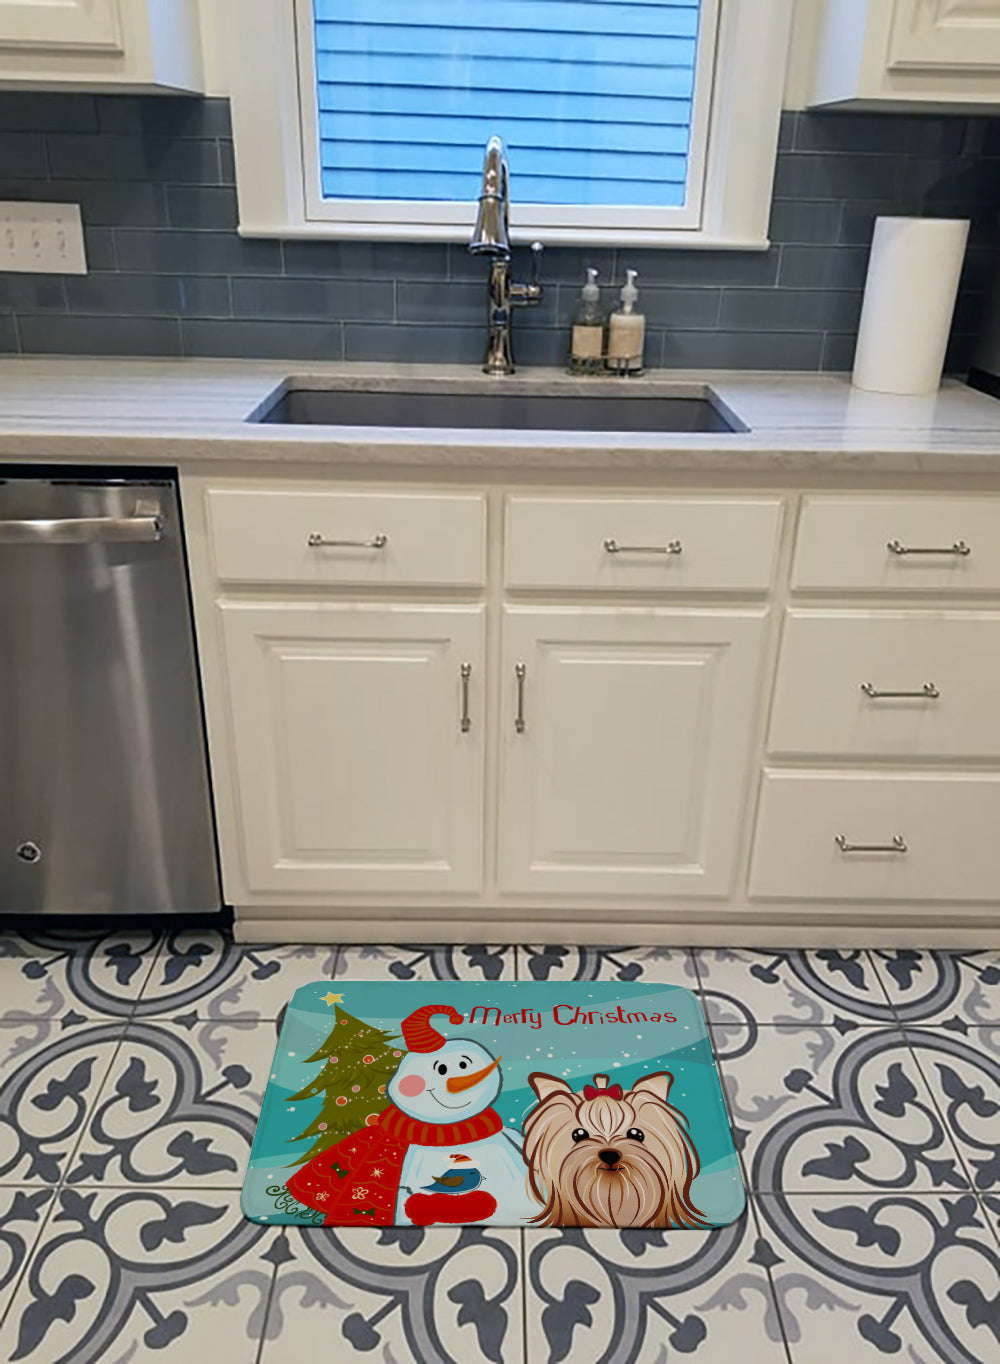 Snowman with Yorkie Yorkishire Terrier Machine Washable Memory Foam Mat BB1824RUG - the-store.com